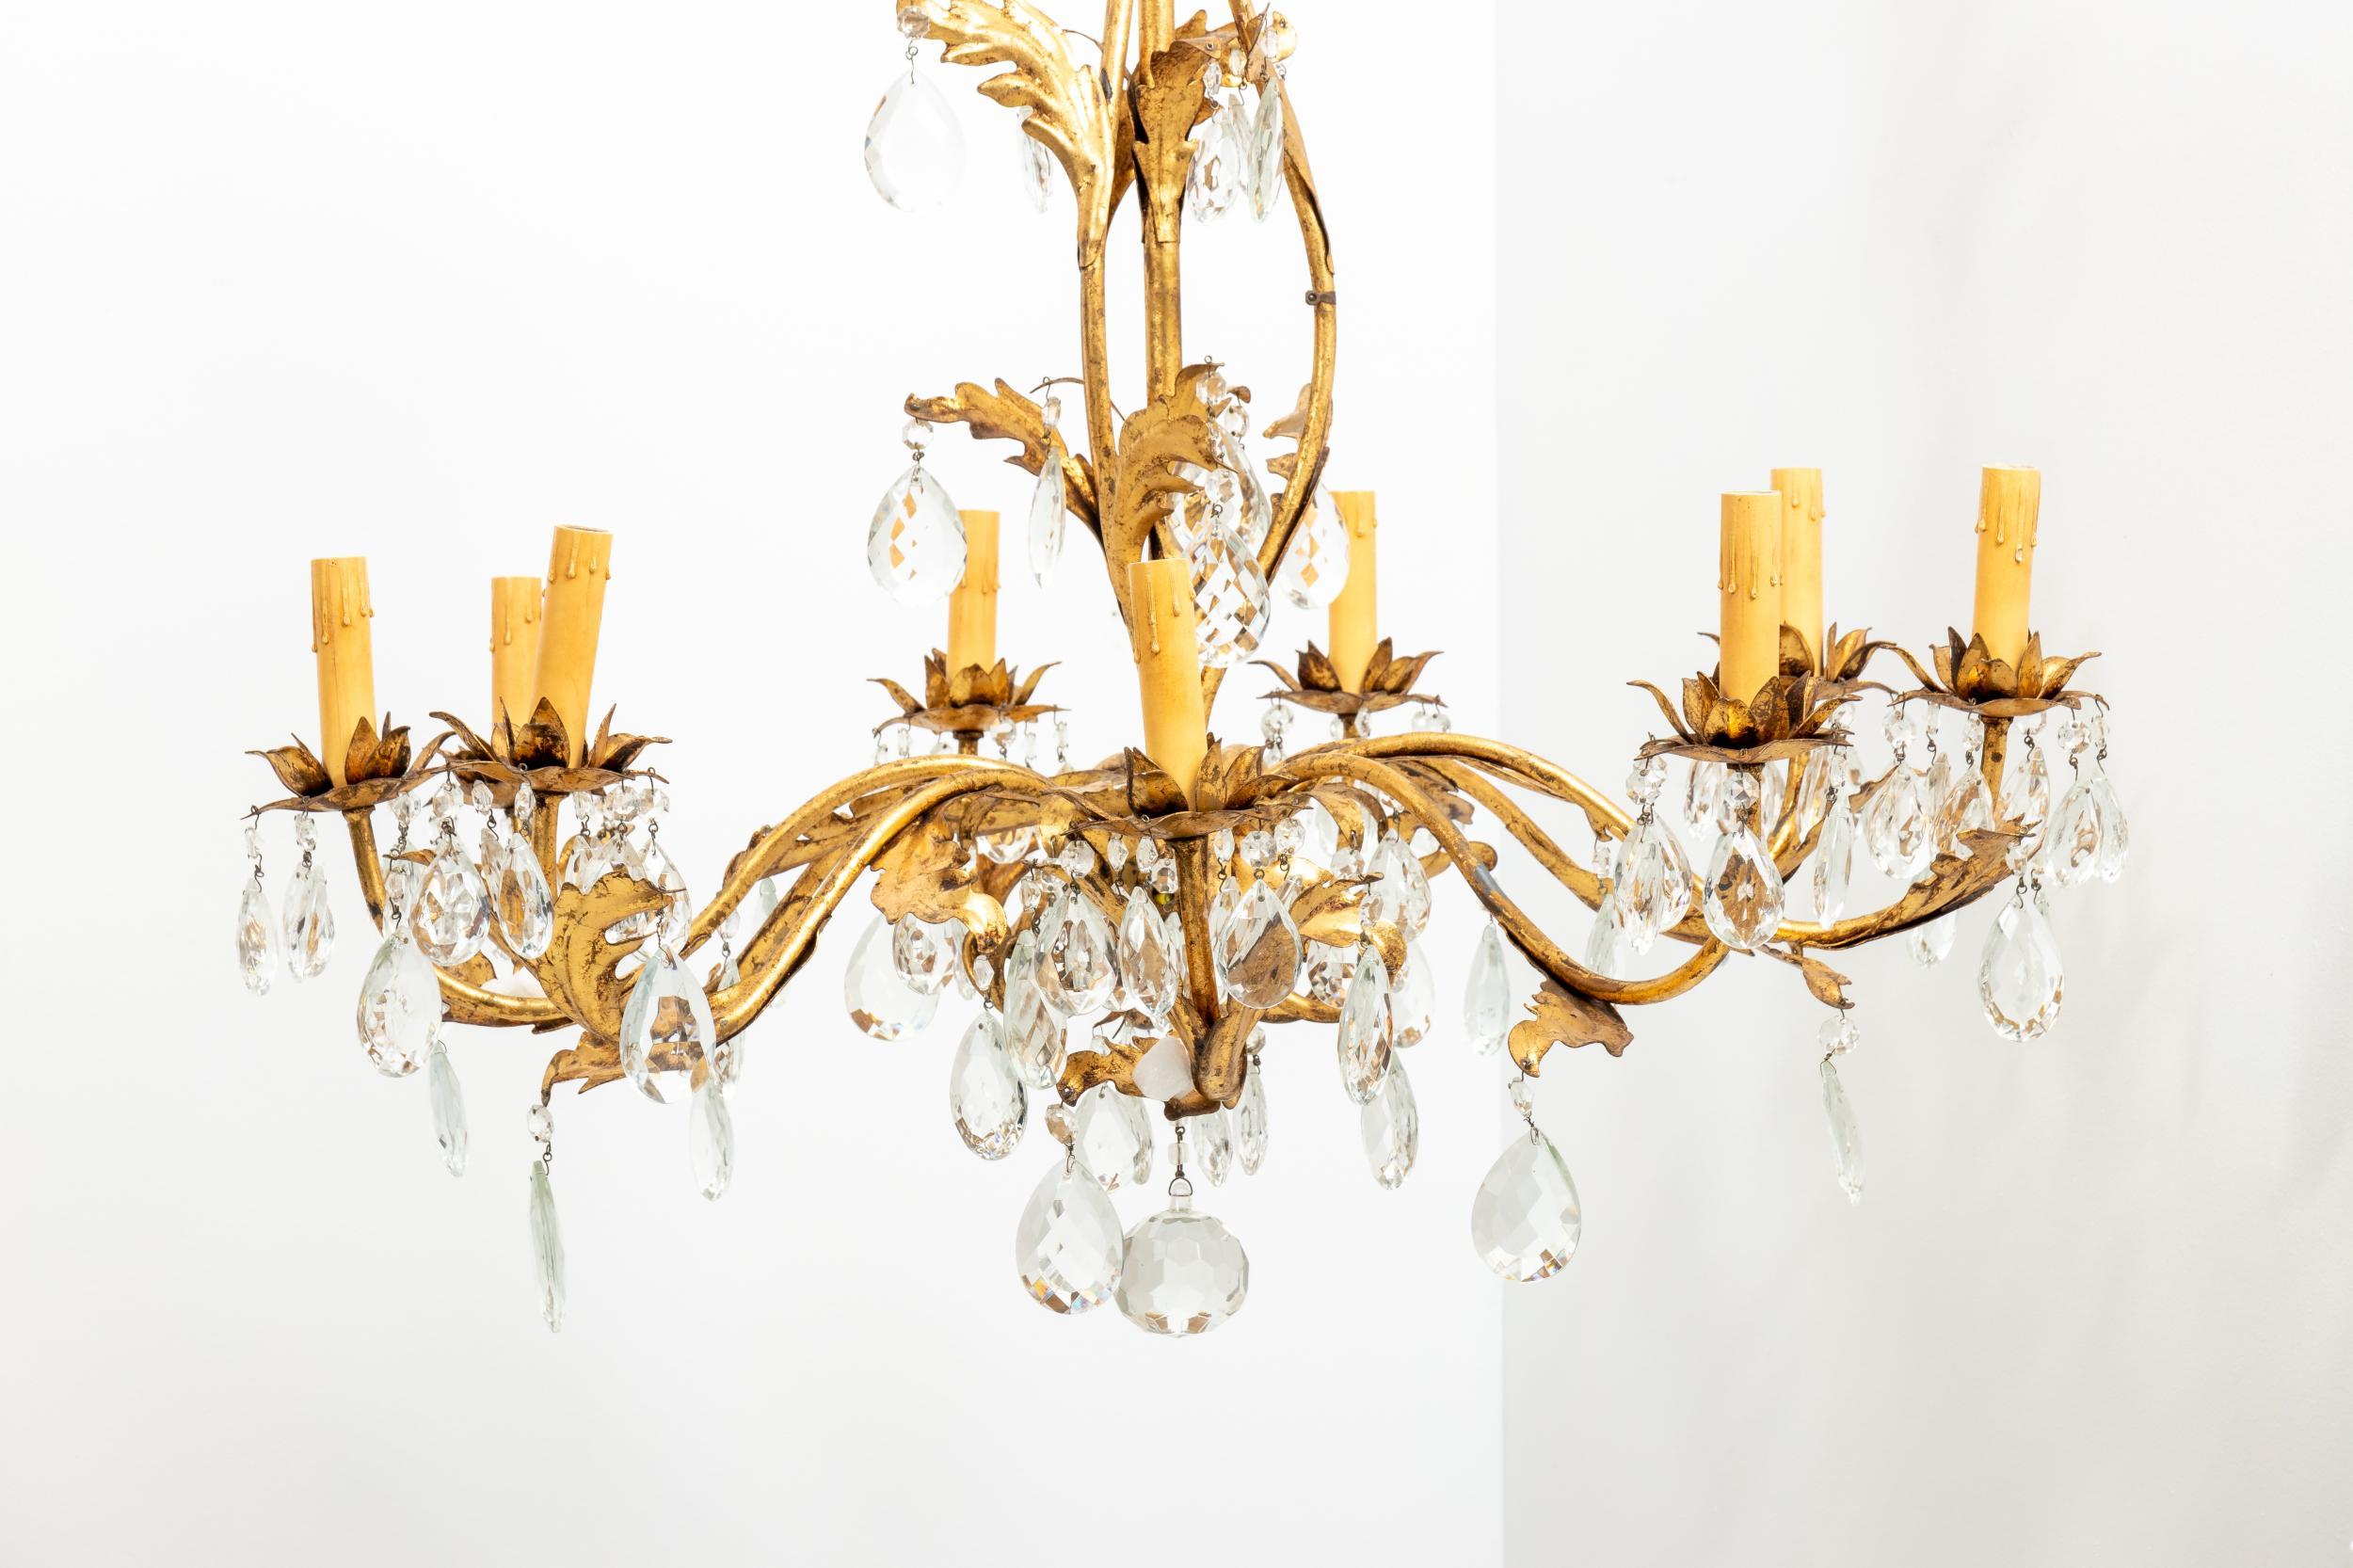 Mid-20th century crystal and gilt chandelier with nine arms. Please note of wear consistent with age including finish loss to the gilded leaves. Shades not included.